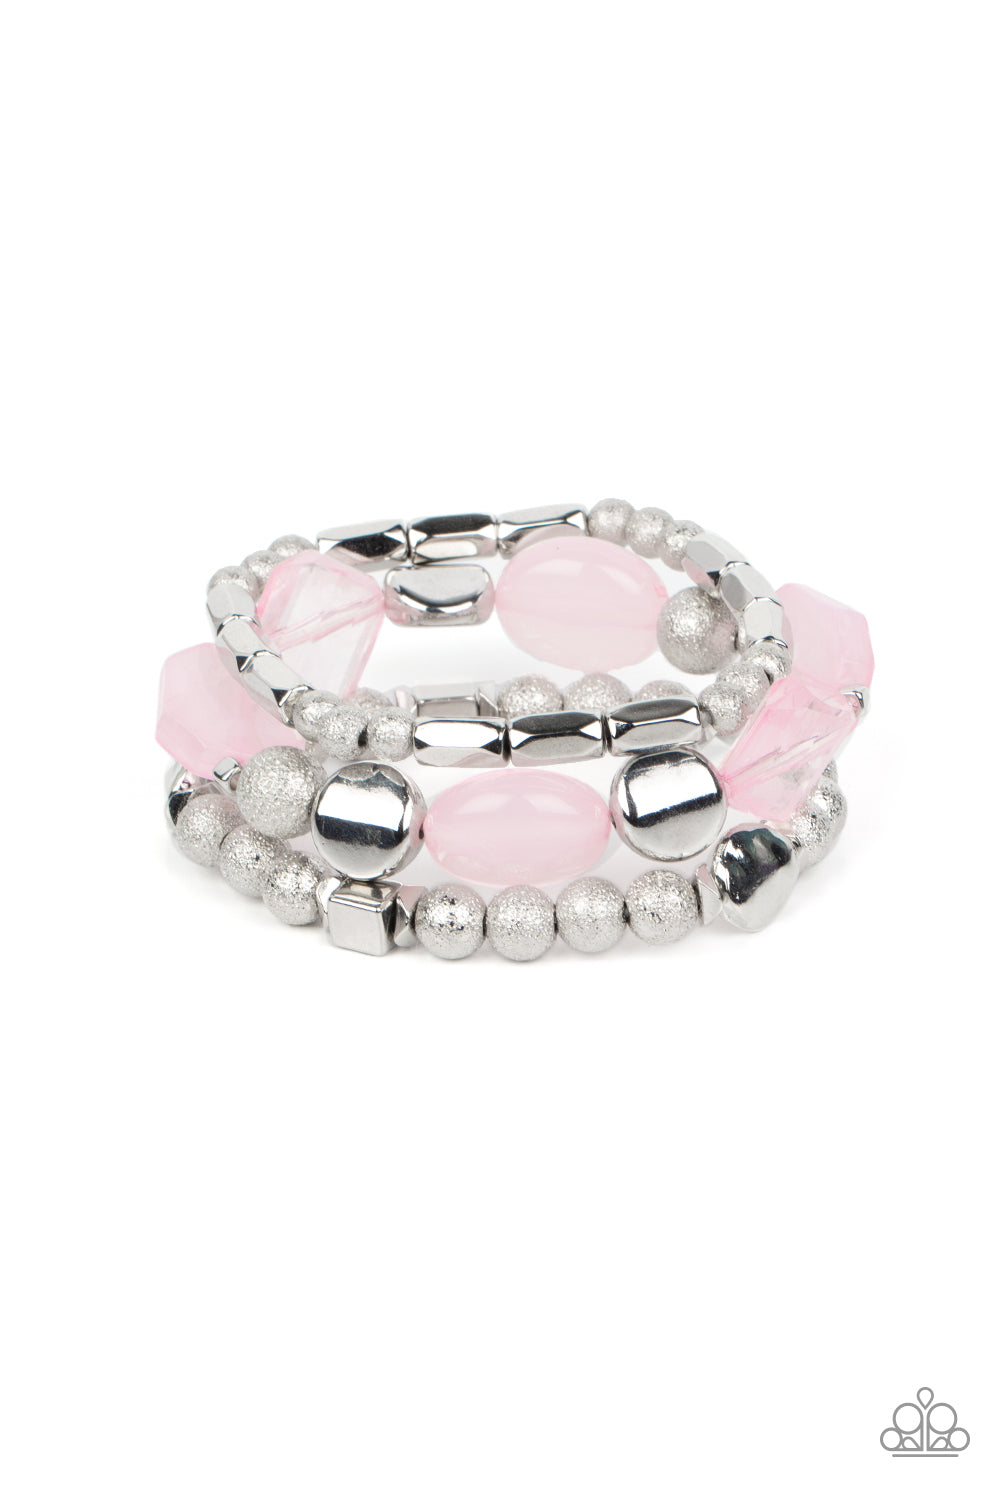 Marina Magic - Pink and Silver Fashion Bracelets - Paparazzi Accessories - Infused with enchanting pops of Pale Rosette crystal-like and glassy accents, a mismatched assortment of hammered, cube, and faceted silver beads are threaded along stretchy bands around the wrist, creating shimmery layers.